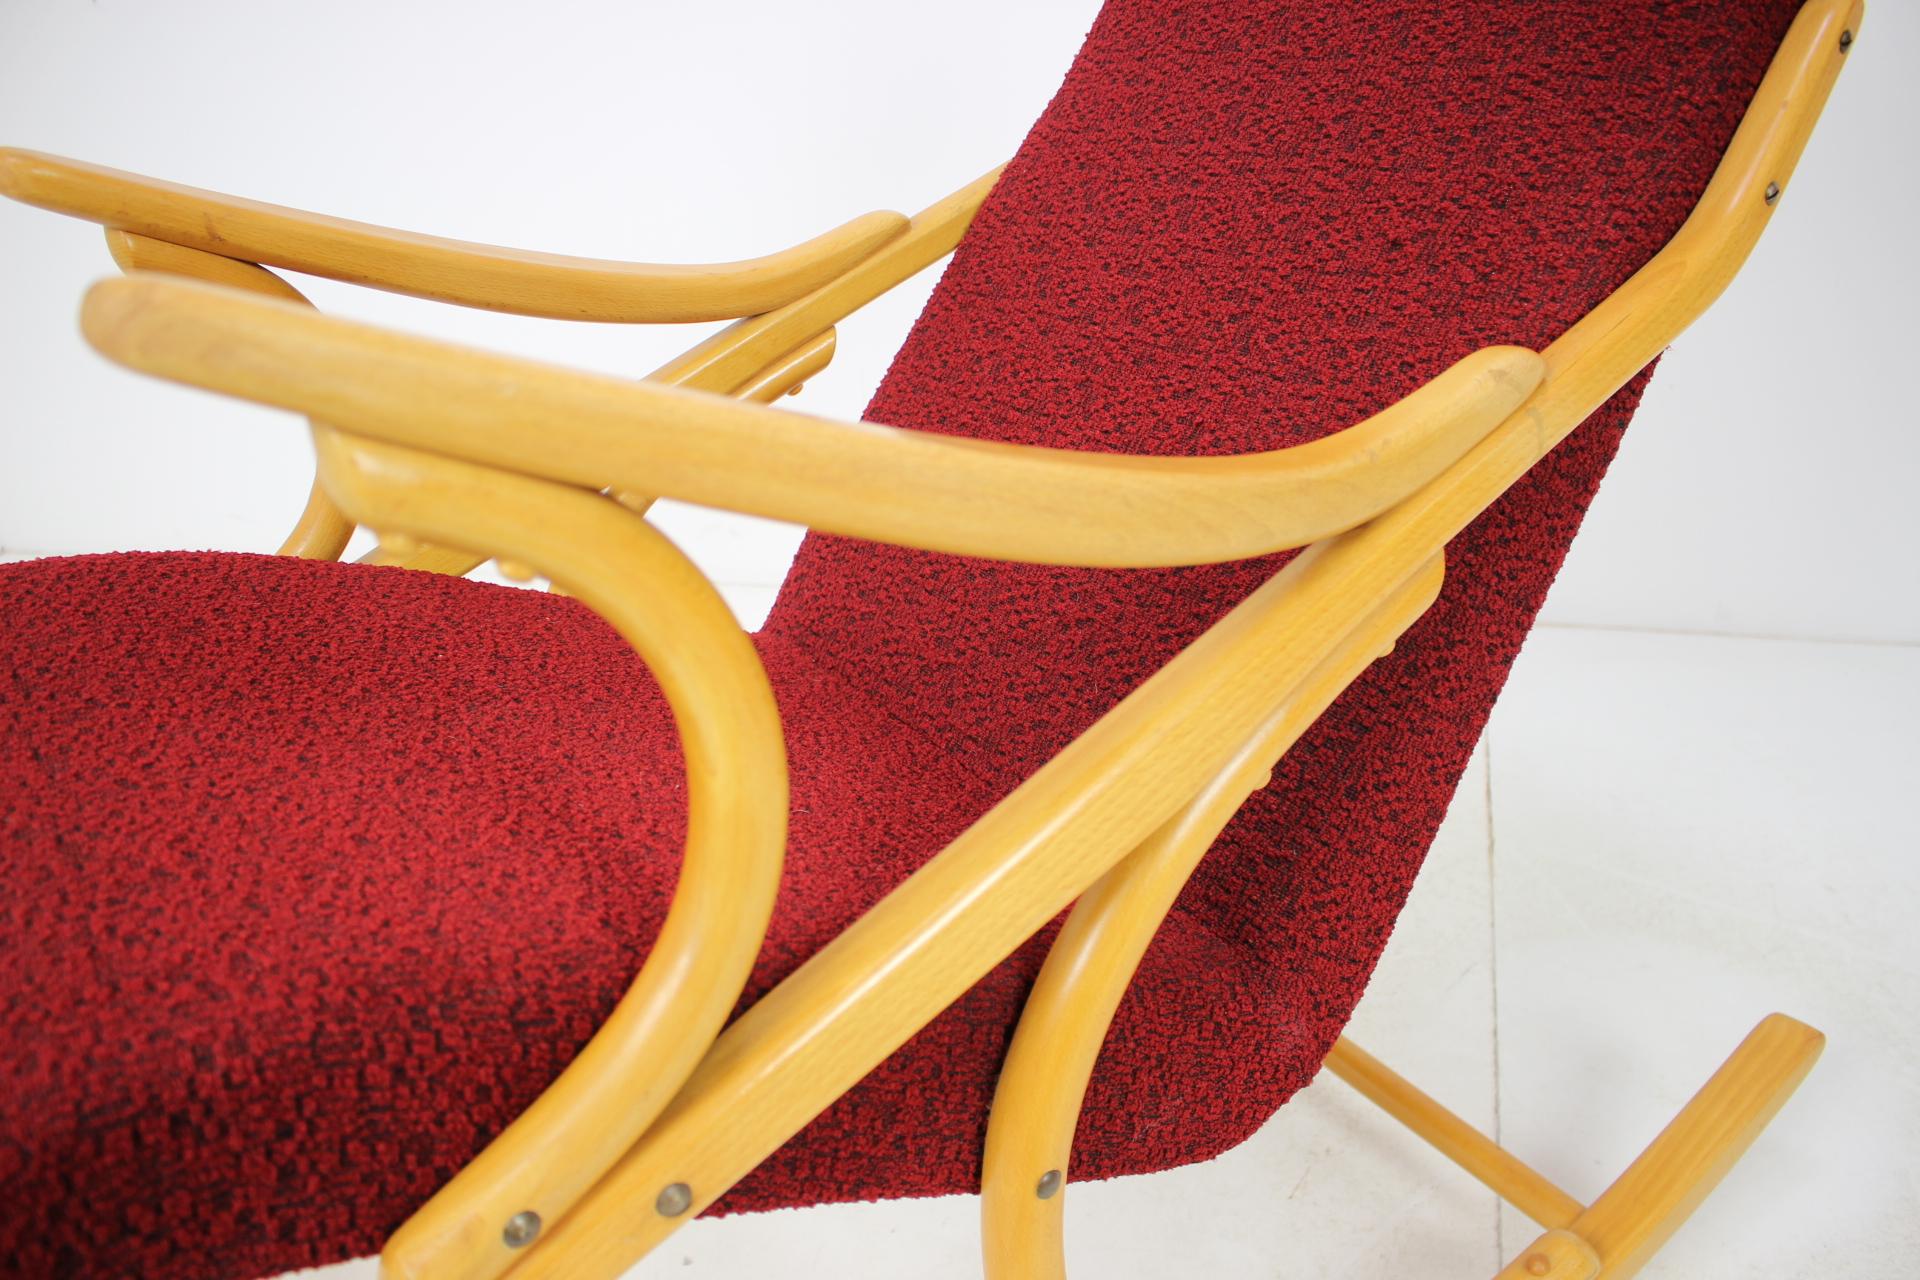 Iconic Midcentury Design Rocking Chair / Expo, 1970 In Good Condition For Sale In Praha, CZ